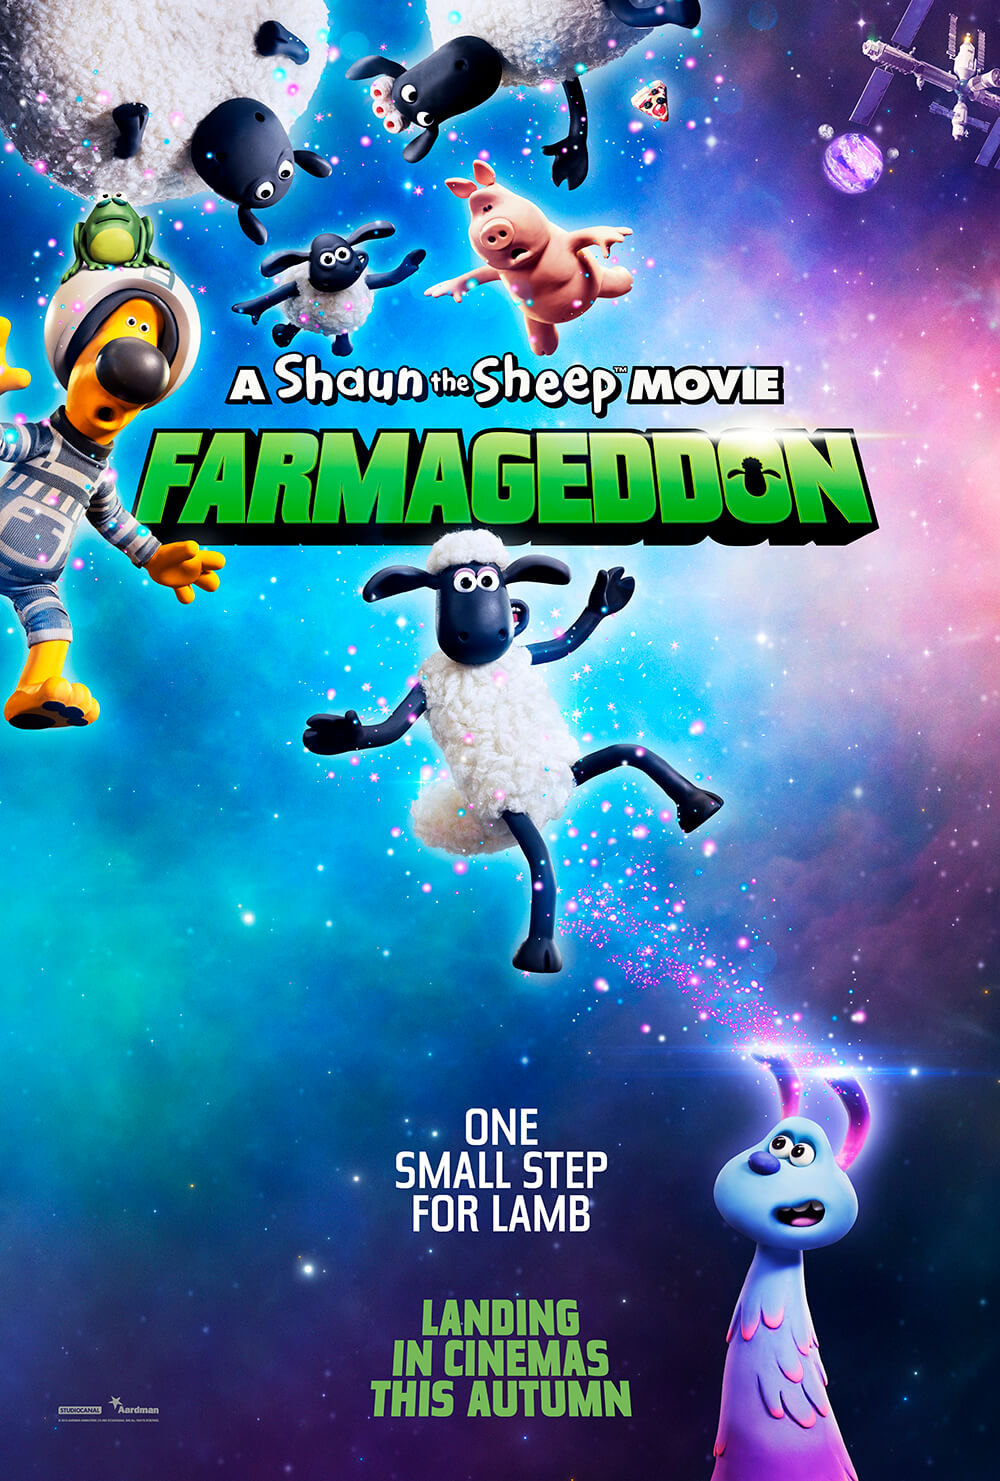 film poster showing animated sheep and aliens in space